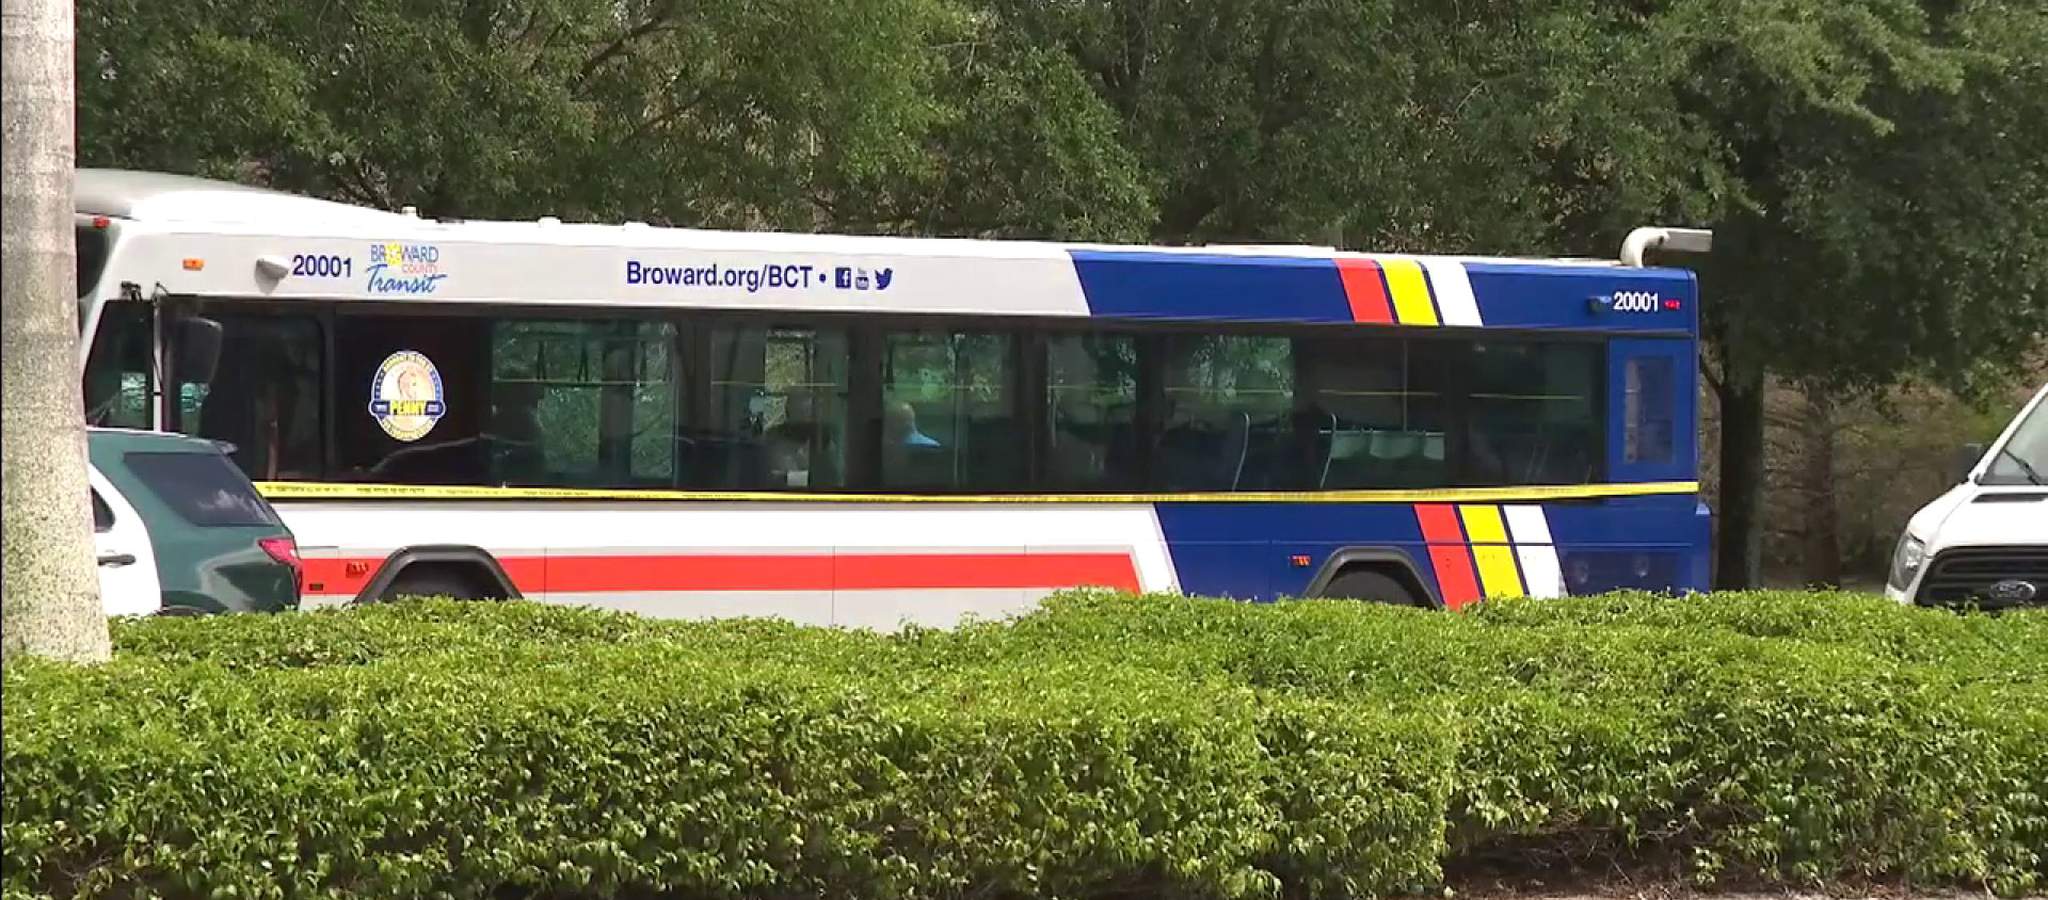 Broward County Transit bus shooting leaves 1 dead, shooter still on the loose, BSO says